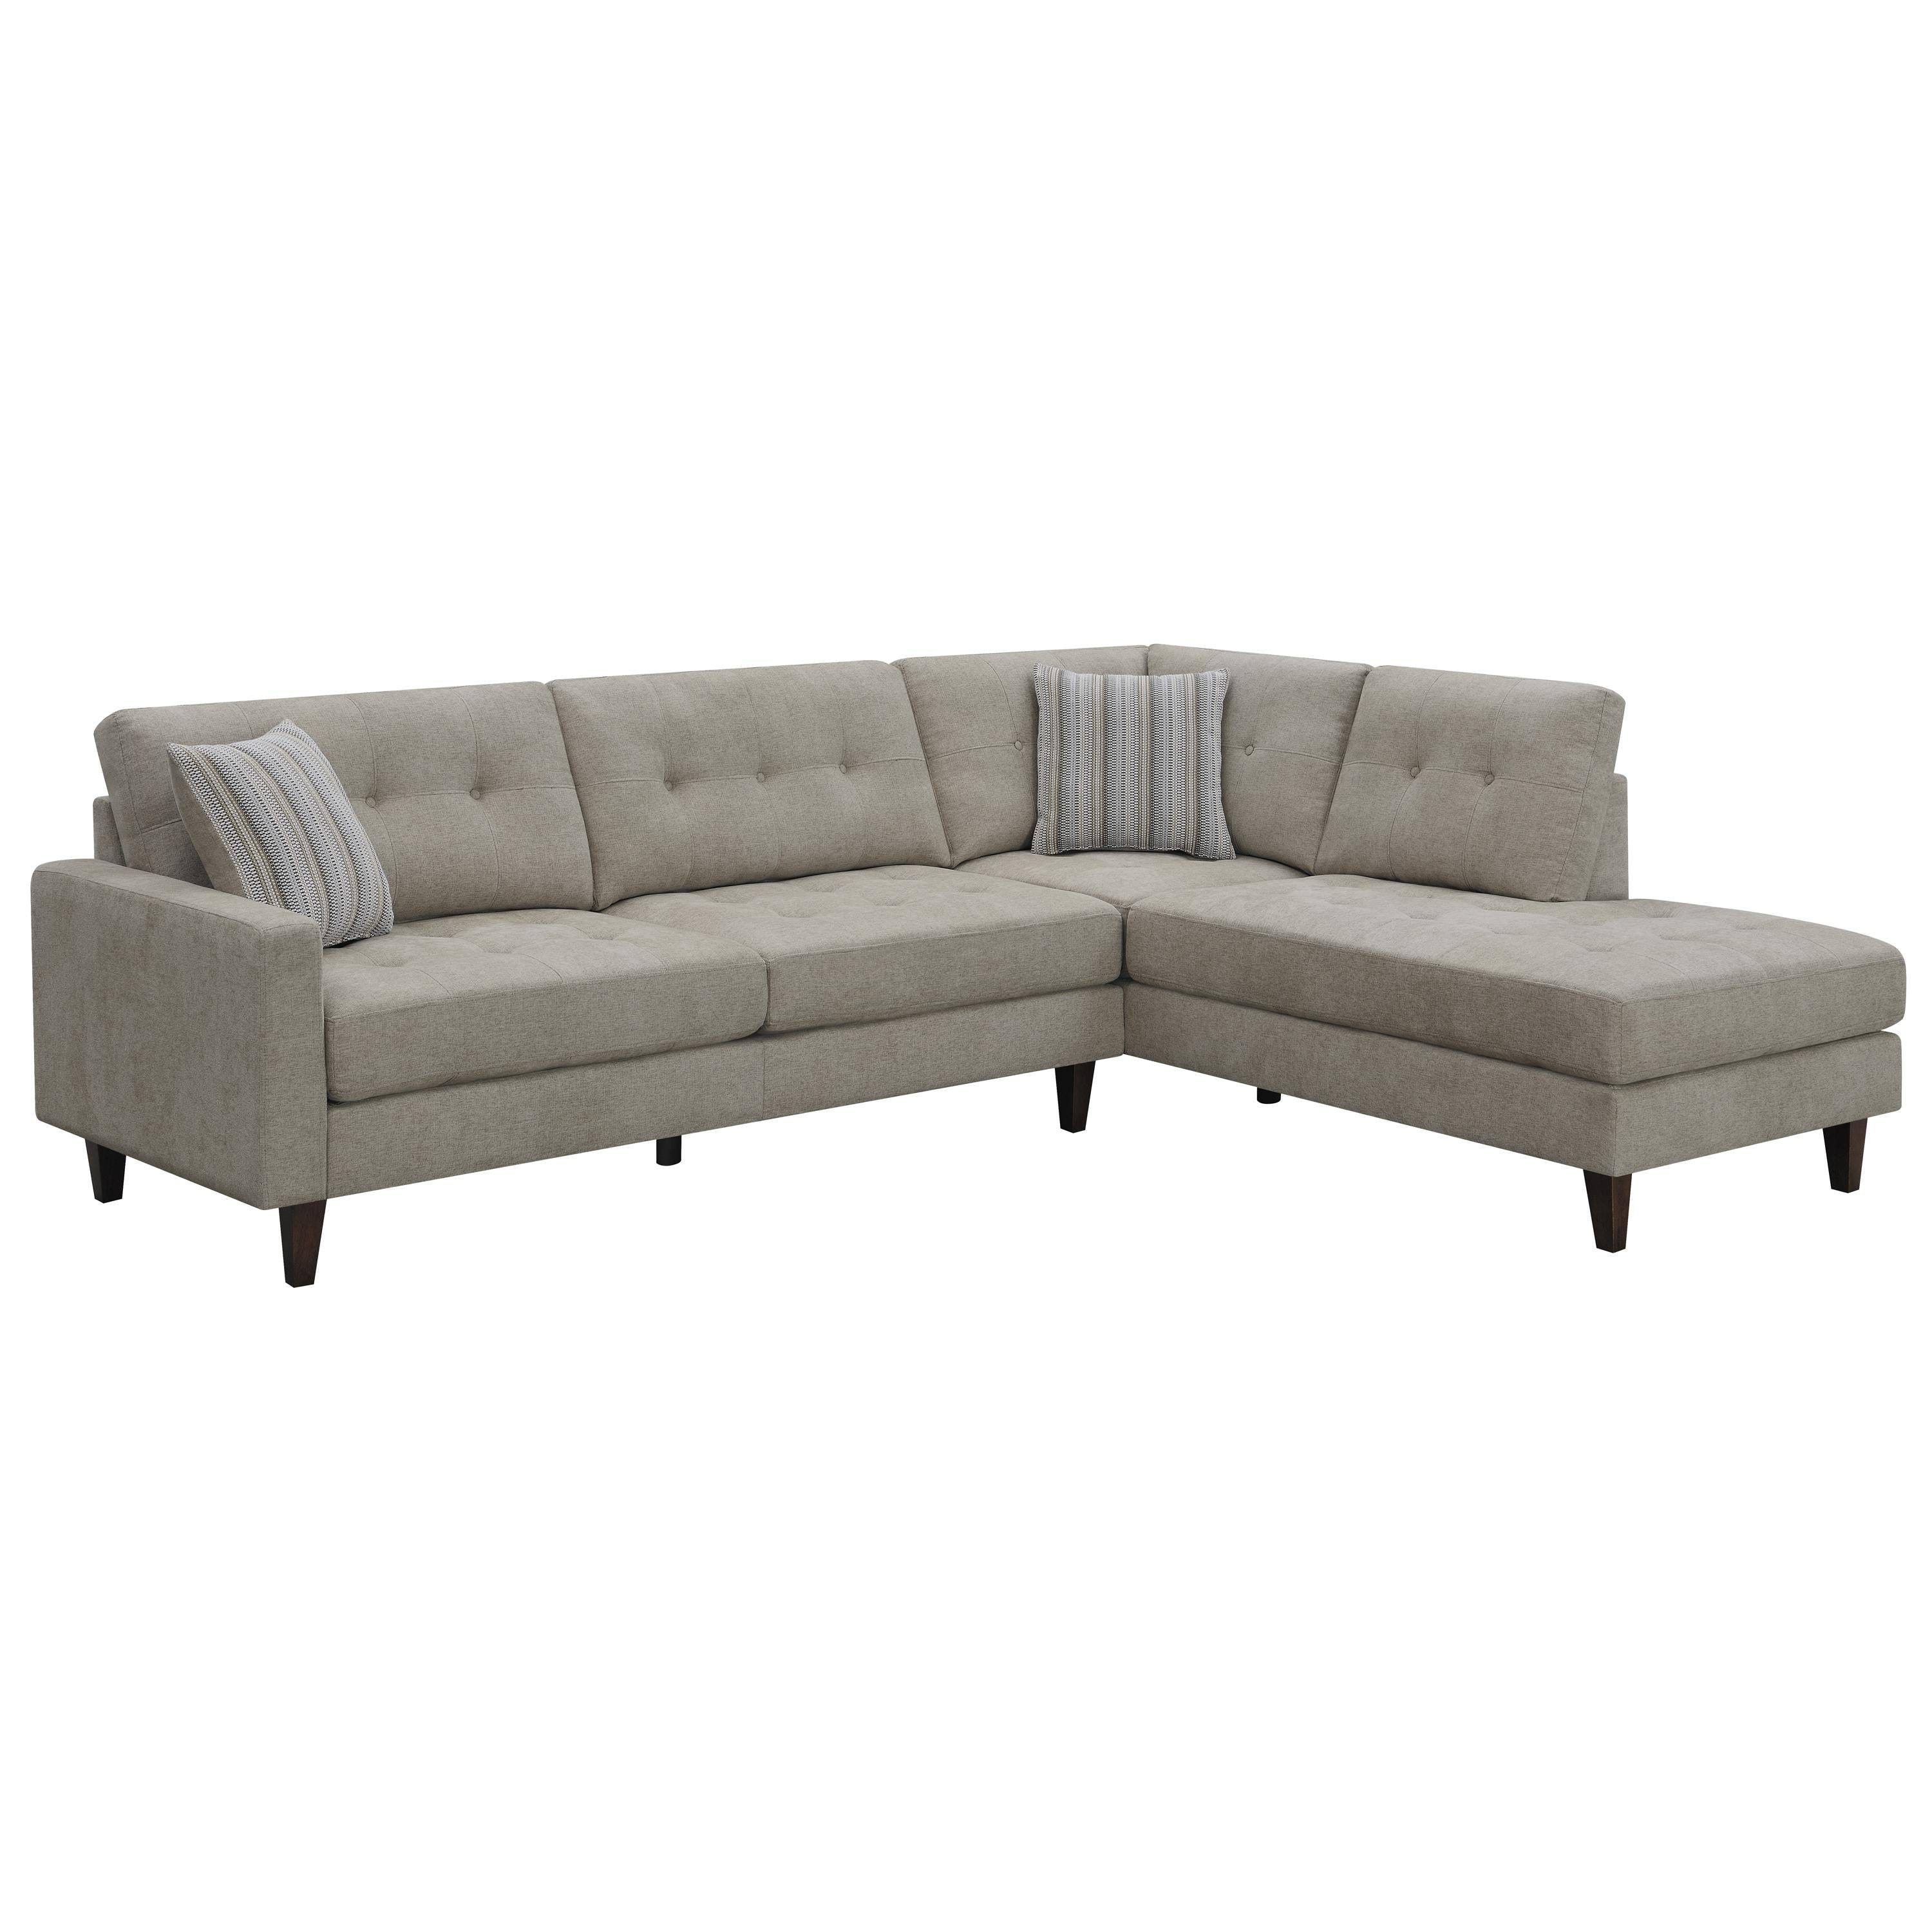 Beige Upholstered Tufted Sectional Sofa | Image